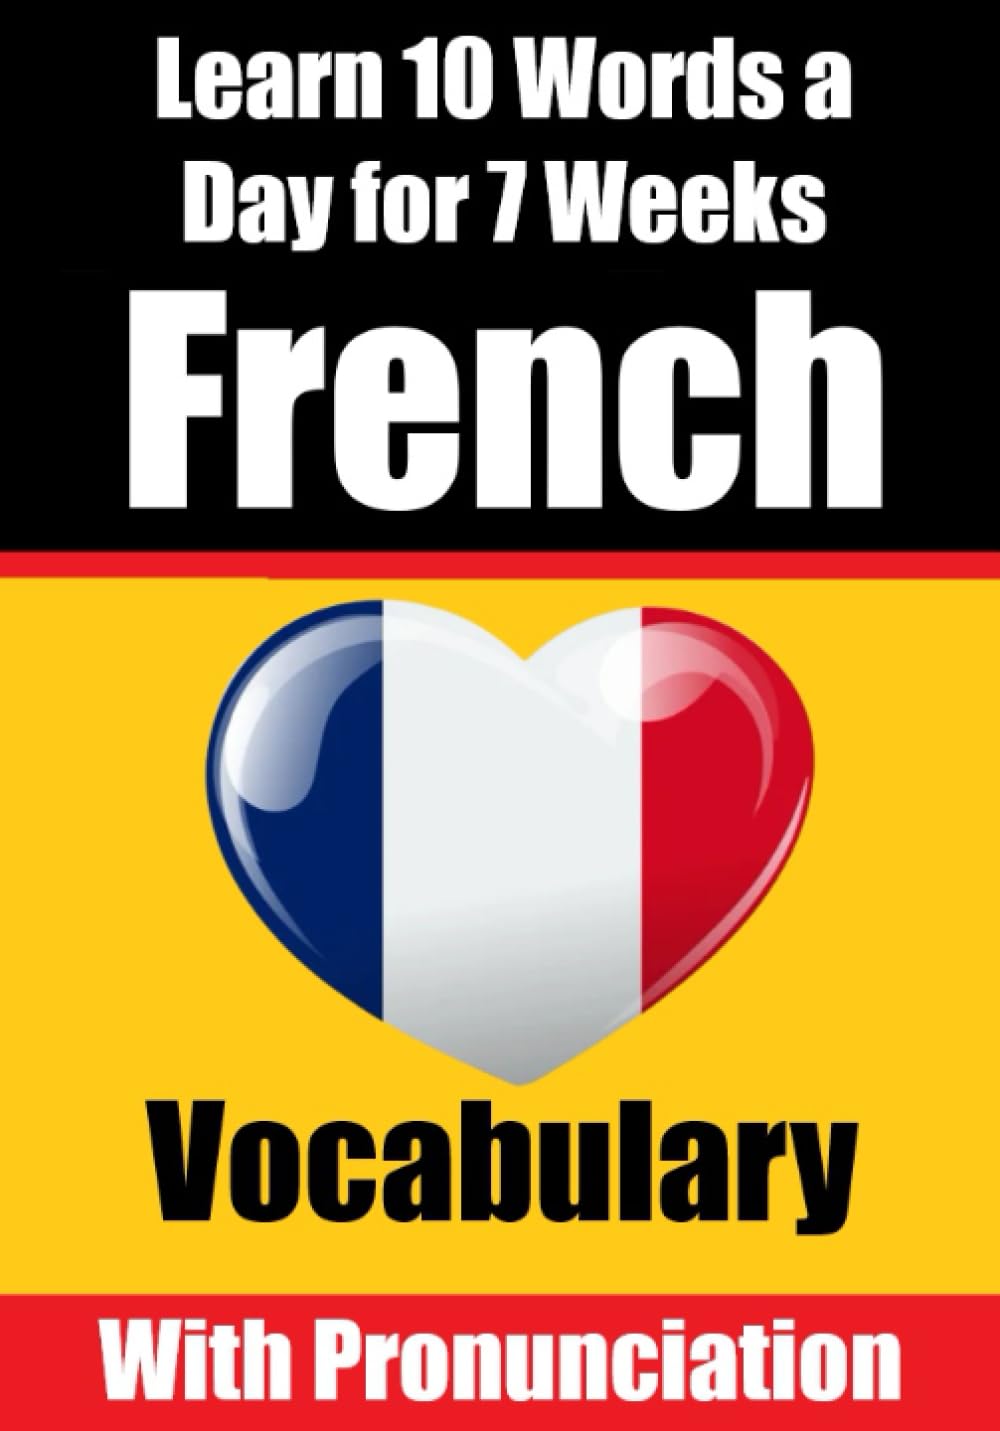 Learn 10 French Words a Day for 7 Weeks - Skriuwer.com